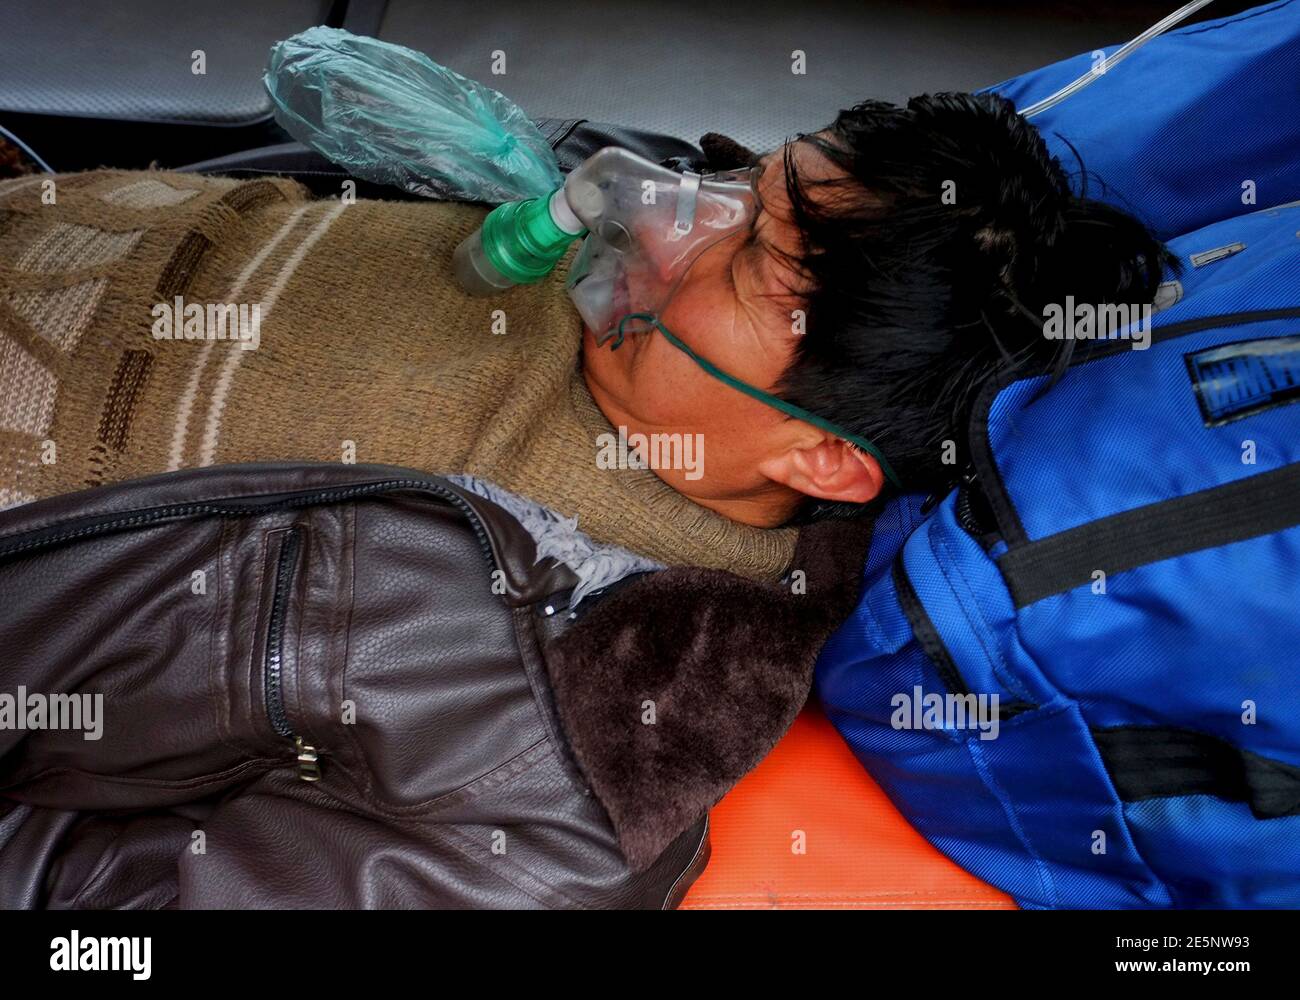 Indigenous leader Rafael Quispe, a former leader of Bolivia's CONAMAQ (National Council of Ayllus and Markas of Qullasuyu), receives oxygen after ending a hunger strike at the congress building in La Paz, October 7, 2013. The CONAMAQ, a confederation to politically represent certain indigenous communities, were protesting against the results of the last census, which caused the geographical region they represent to lose congressional seats for the next legislative elections in 2014, according to local media. The hunger strikers called off their protest on Monday, when it became clear their act Stock Photo